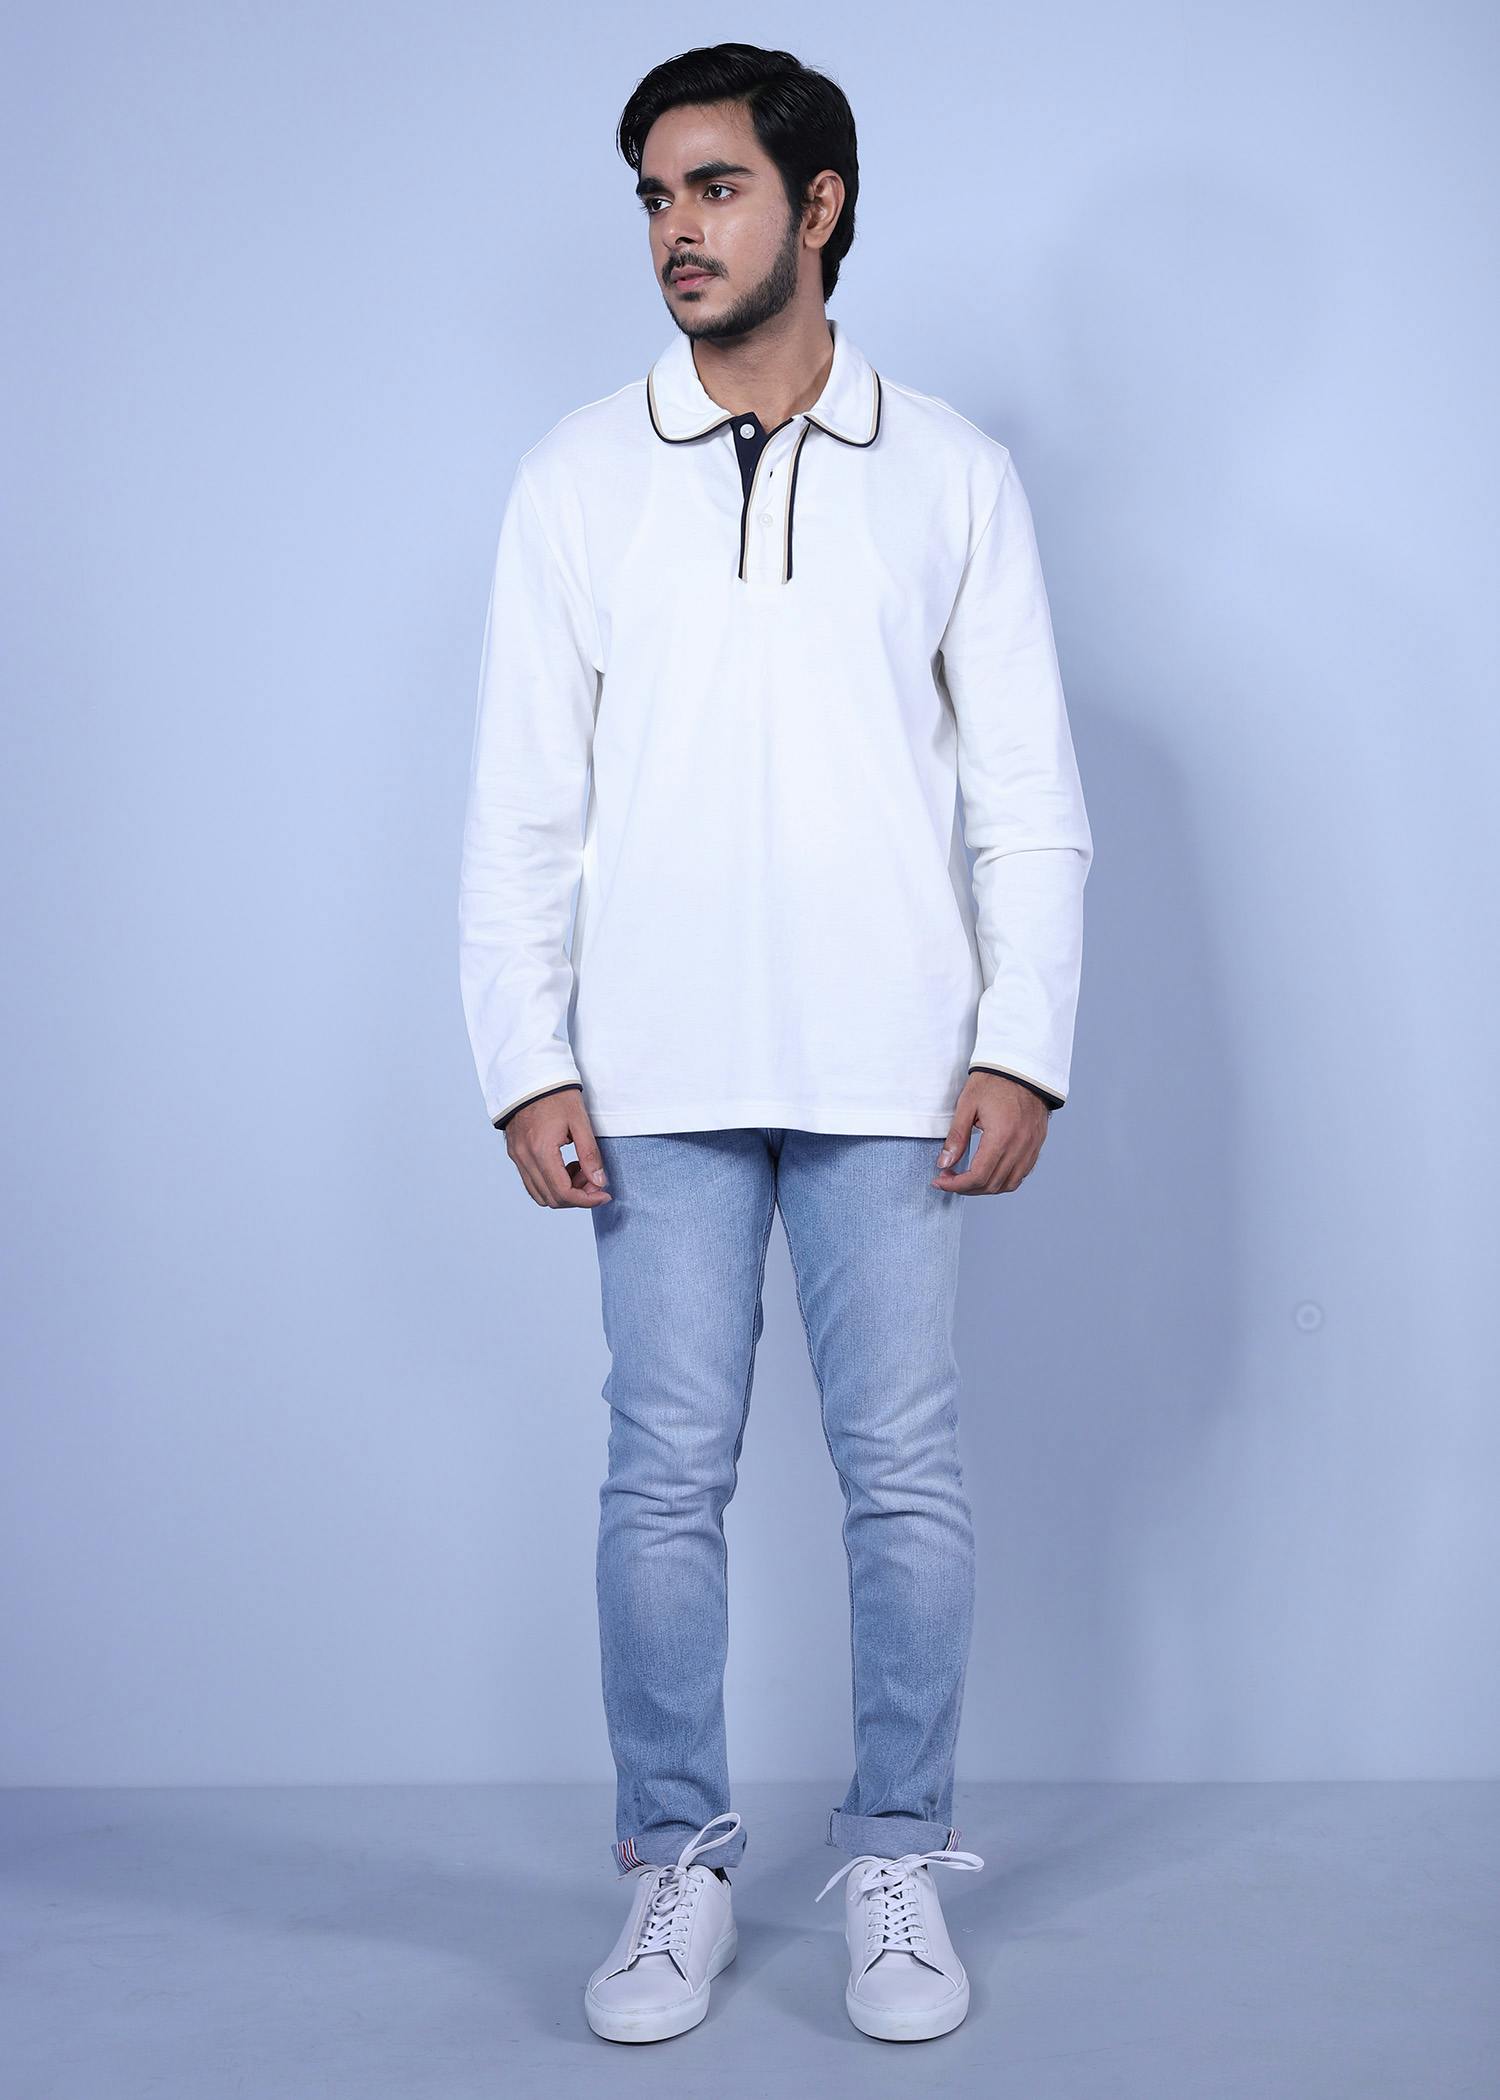 rome ls polo white color full front view